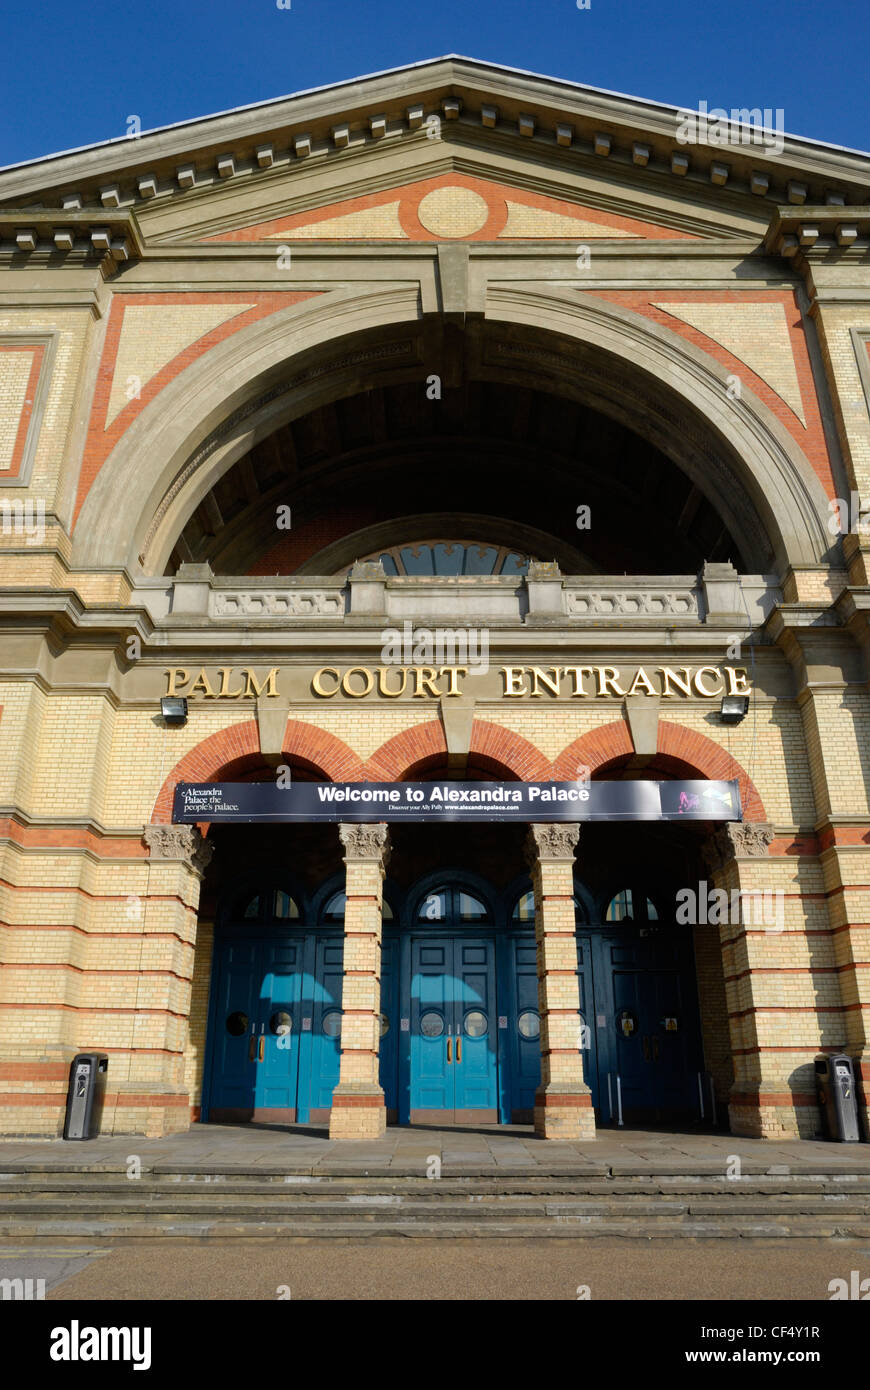 Palm Court Entrance, the main entrance into Alexandra Palace, originally opened in 1873 as 'The People's Palace', an iconic Lond Stock Photo